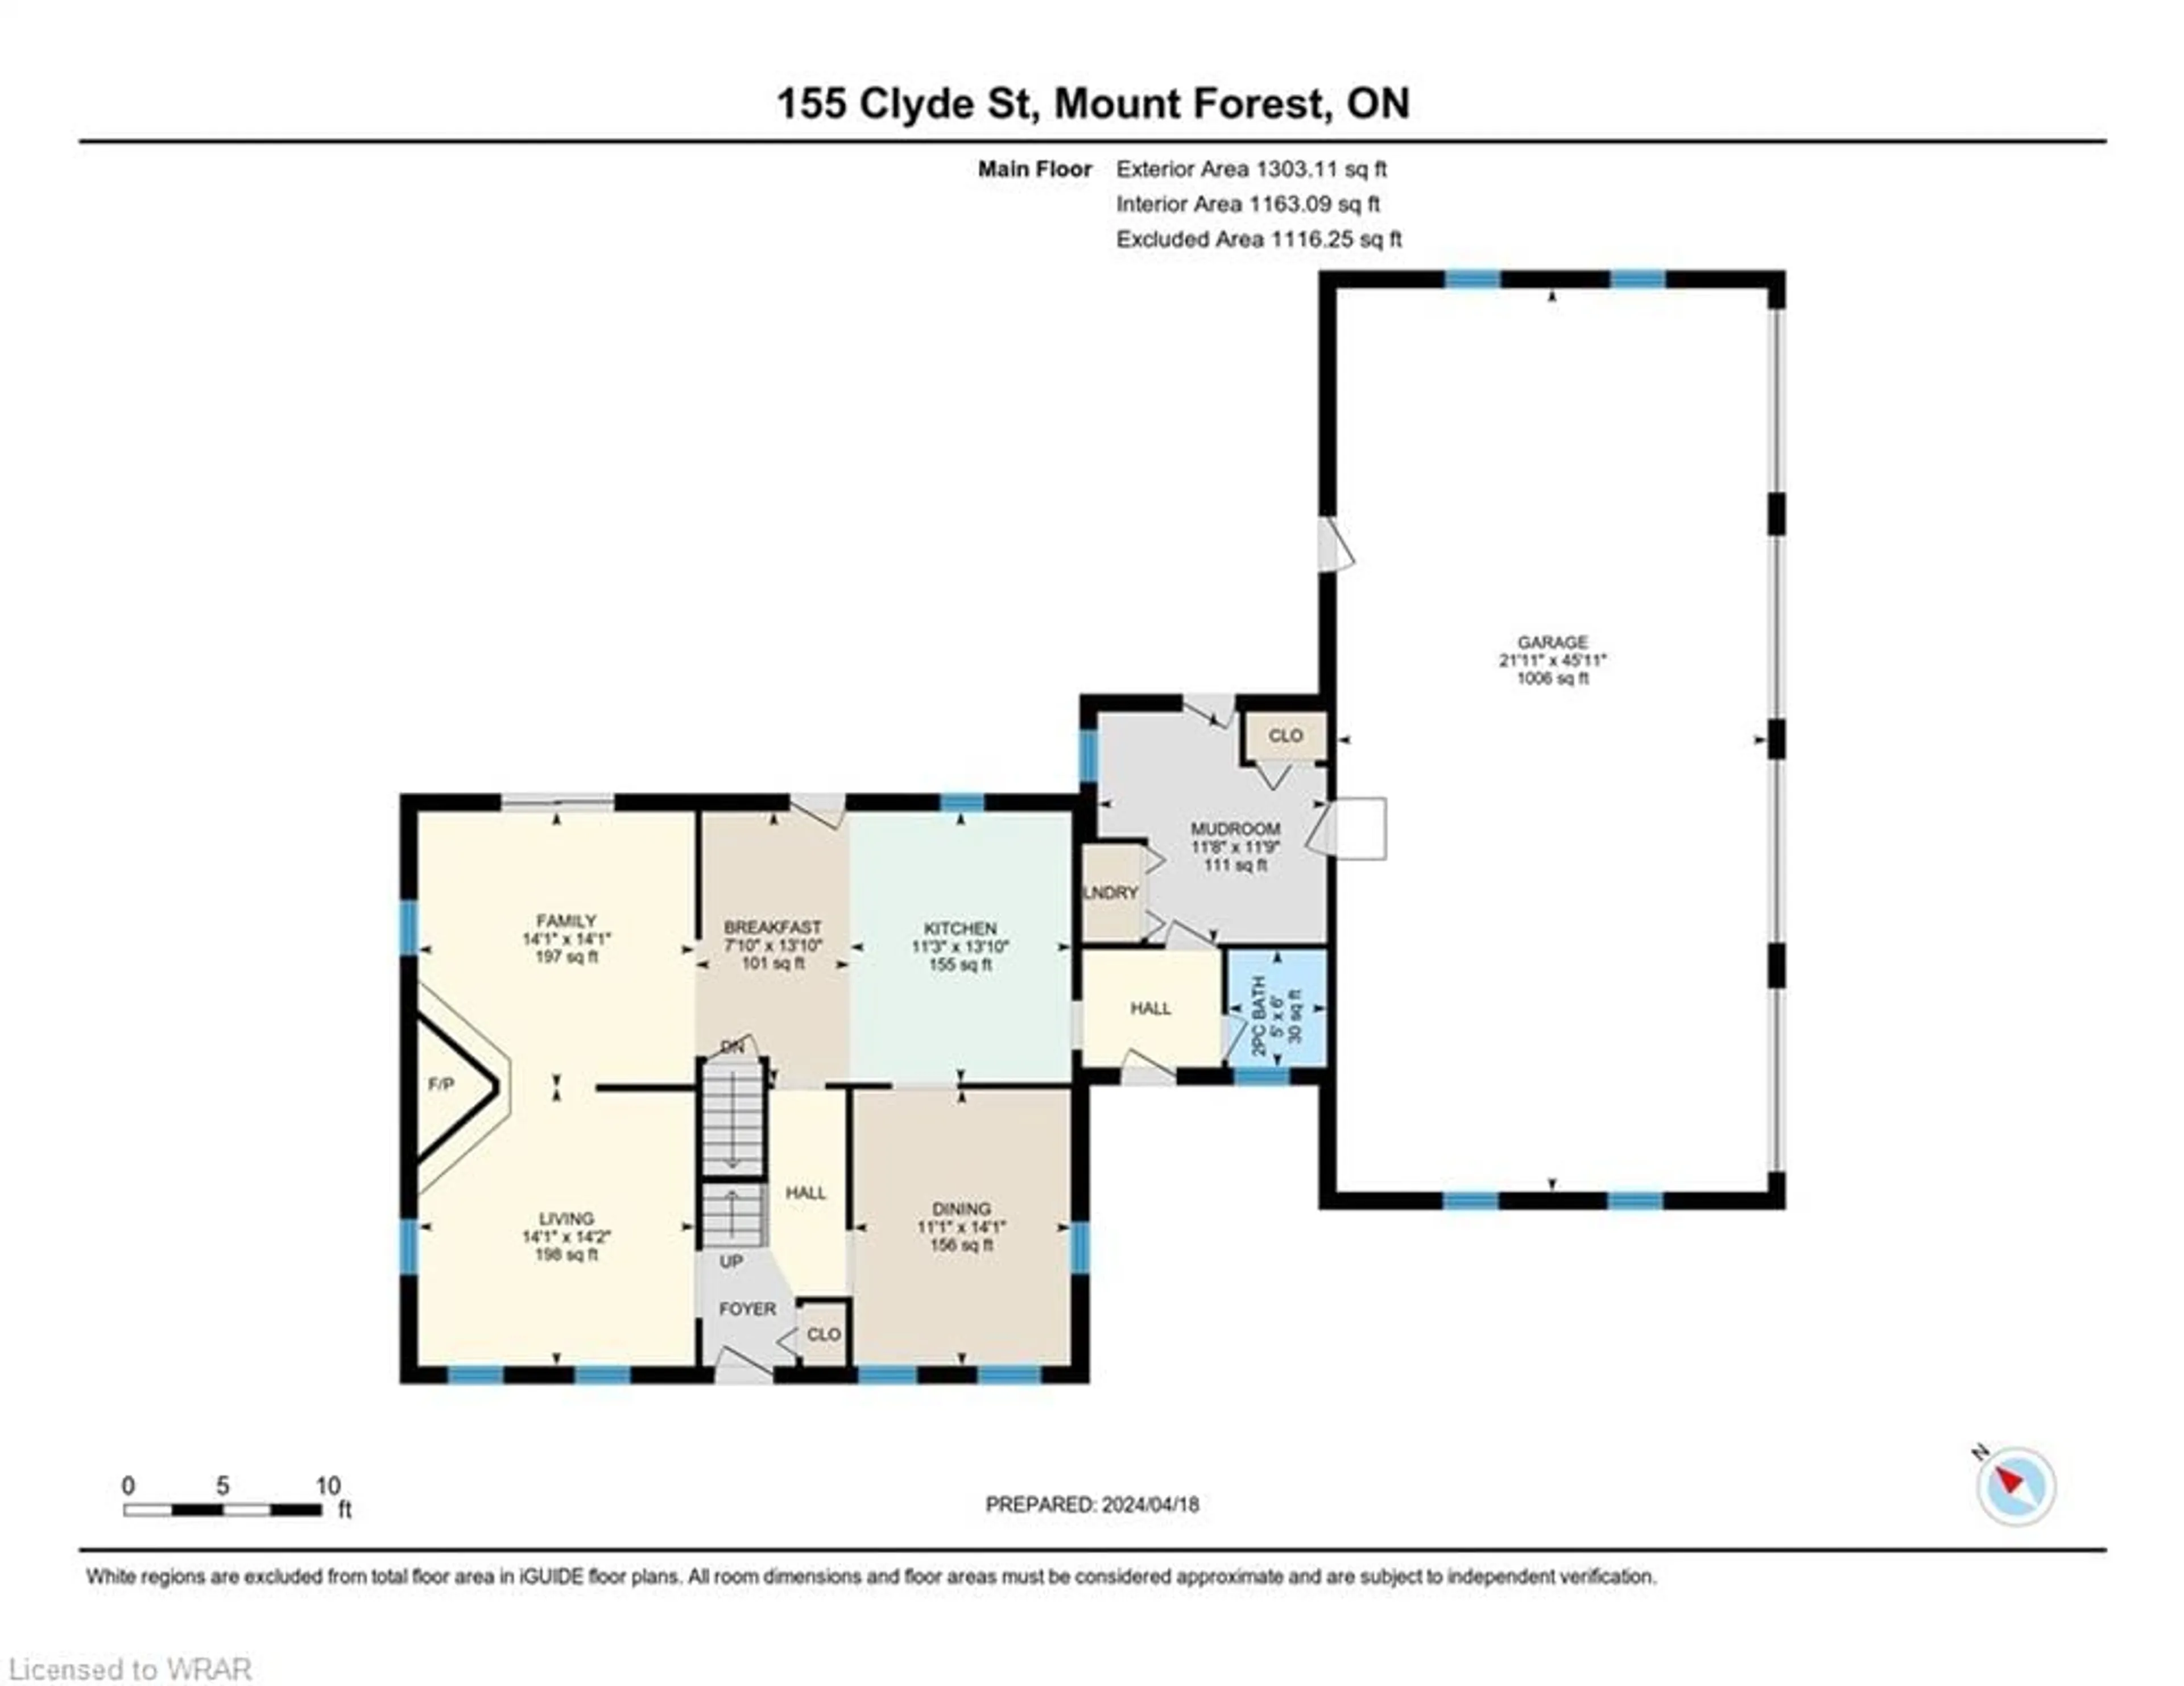 Floor plan for 155 Clyde St, Mount Forest Ontario N0G 2L3